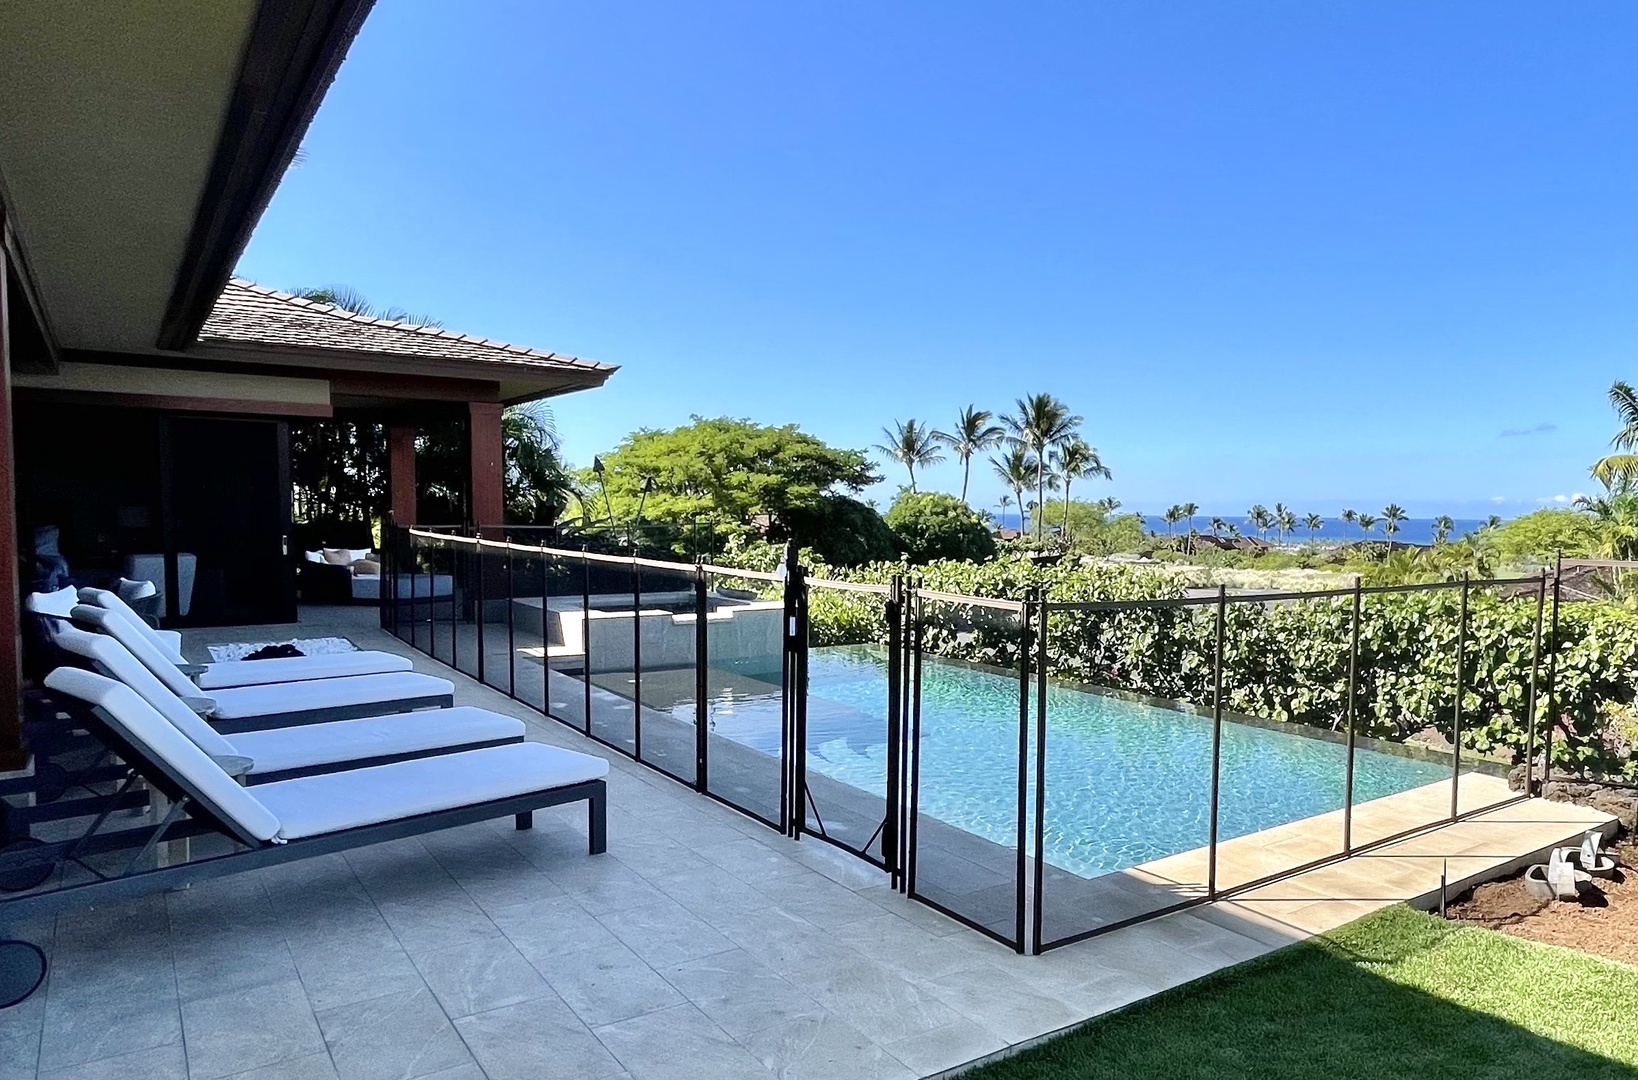 Kailua Kona Vacation Rentals, 4BD Kulanakauhale (3558) Estate Home at Four Seasons Resort at Hualalai - A child safety fence can be erected around the private pool by request (set-up fee applies).